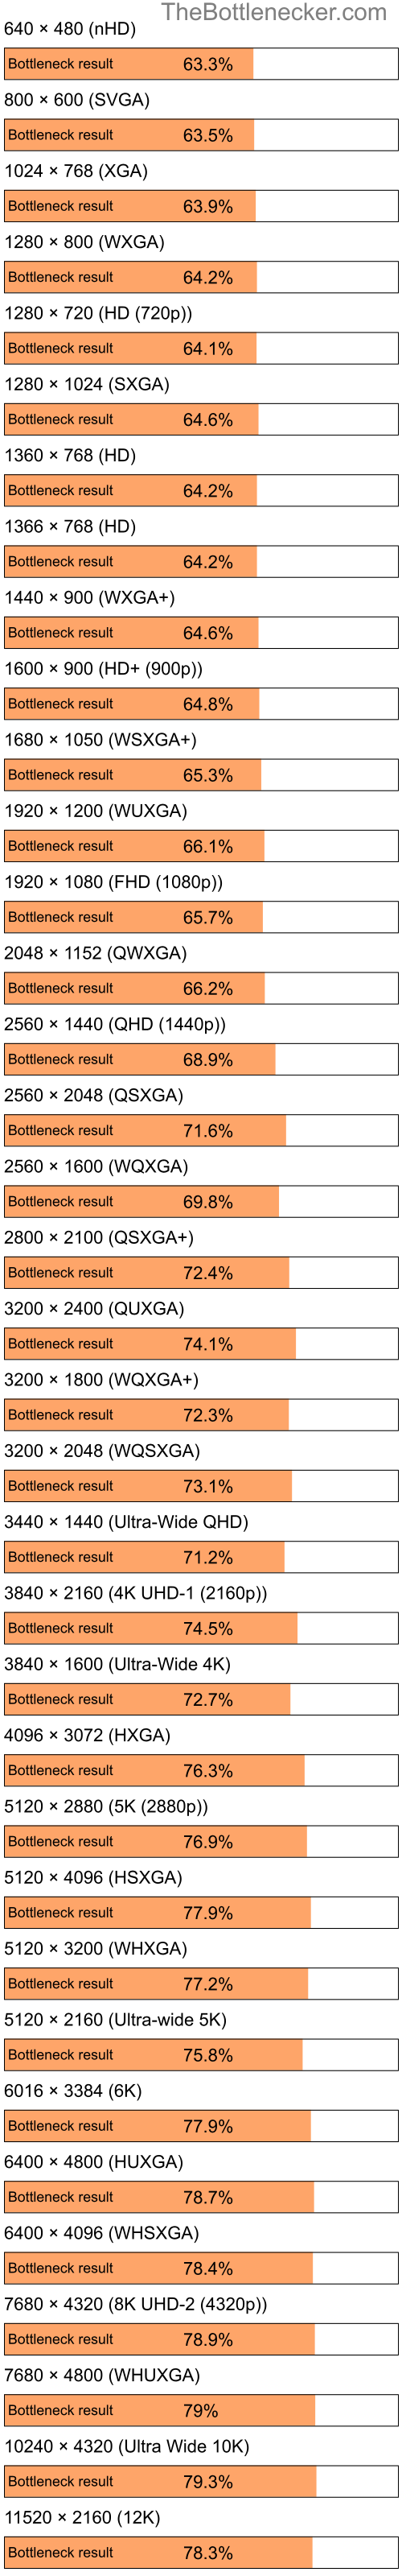 Bottleneck results by resolution for Intel Pentium 4 and AMD Radeon 3100 in General Tasks